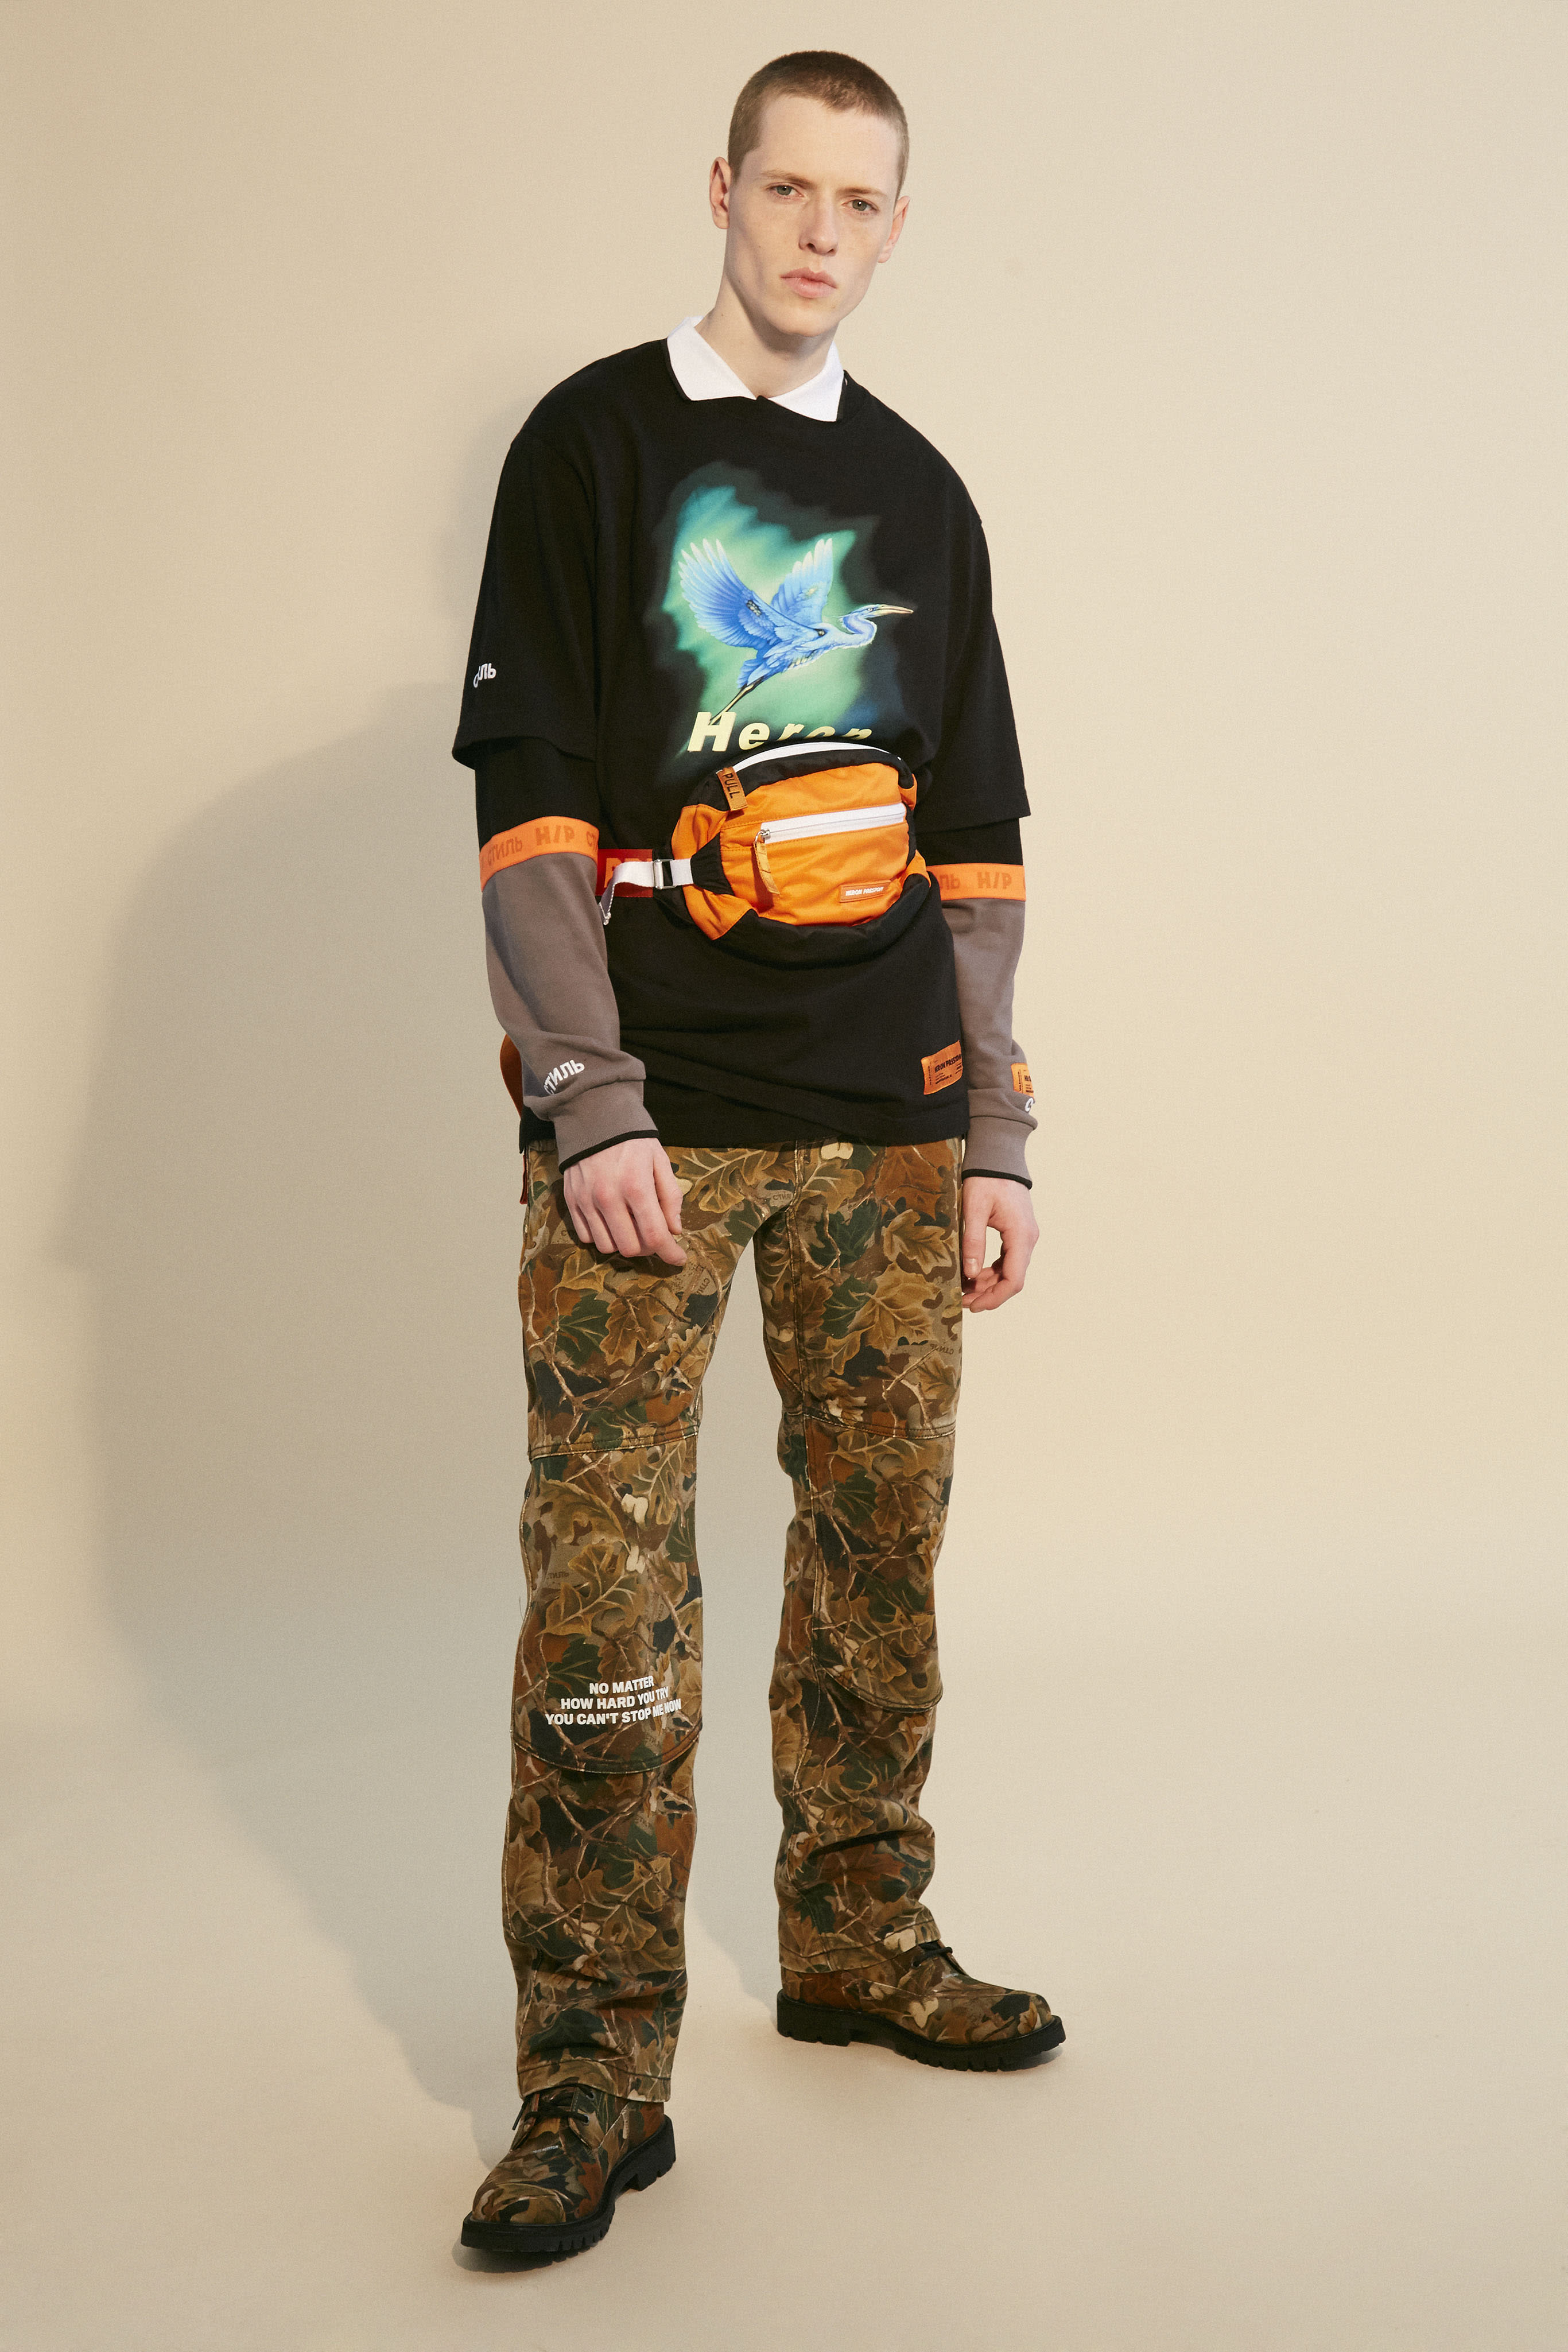 Heron Preston Showcases Out-Of-This-World Nasa Collection and Carhartt